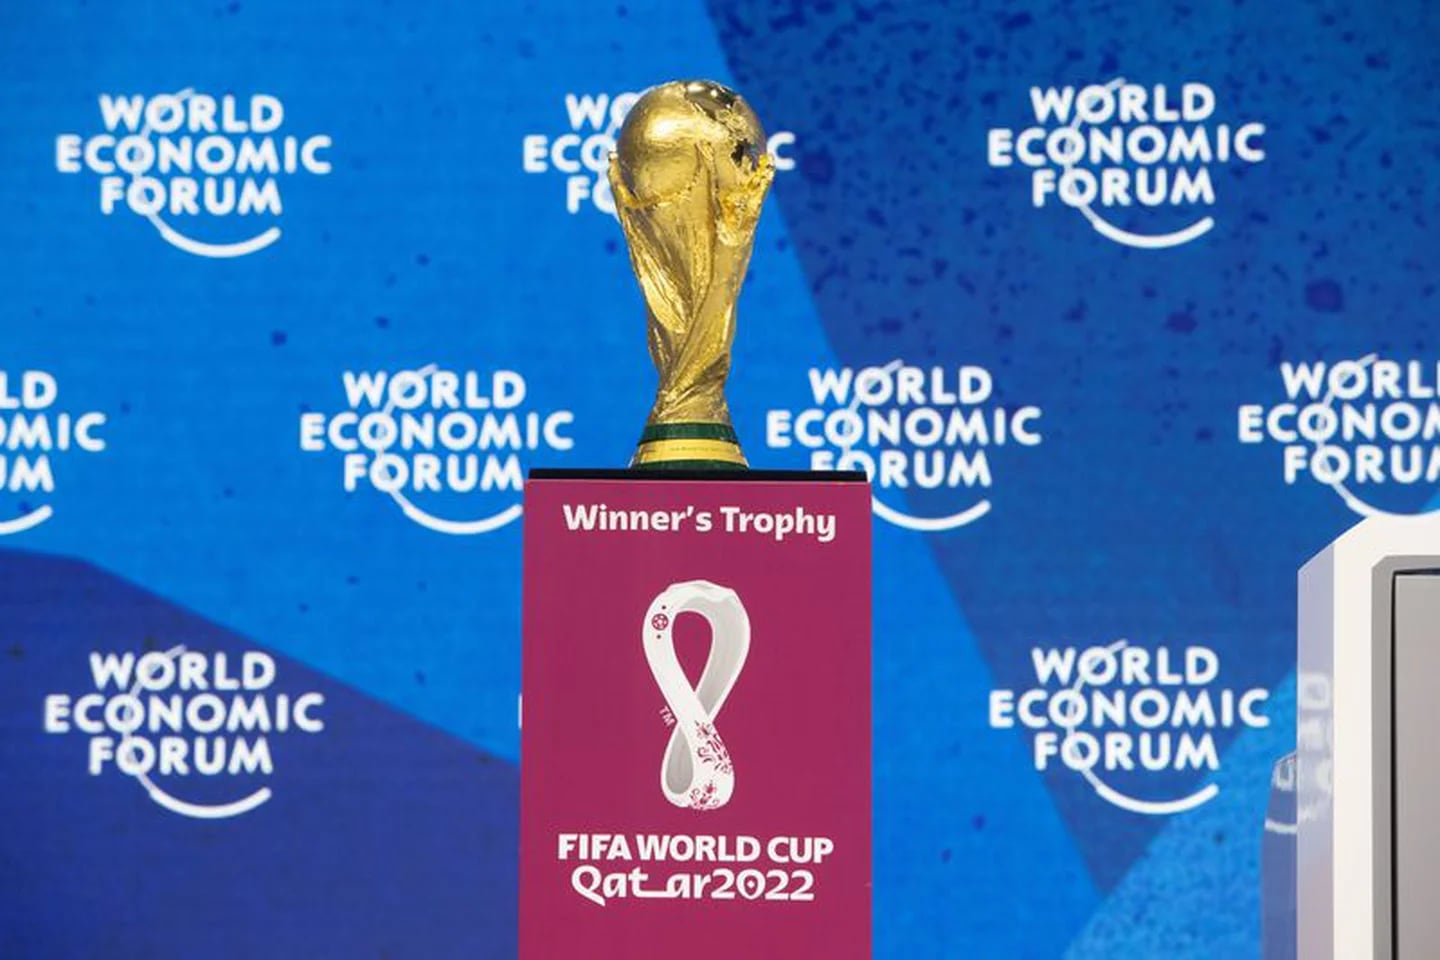 FIFA World Cup™ Trophy Tour by Coca-Cola resumes